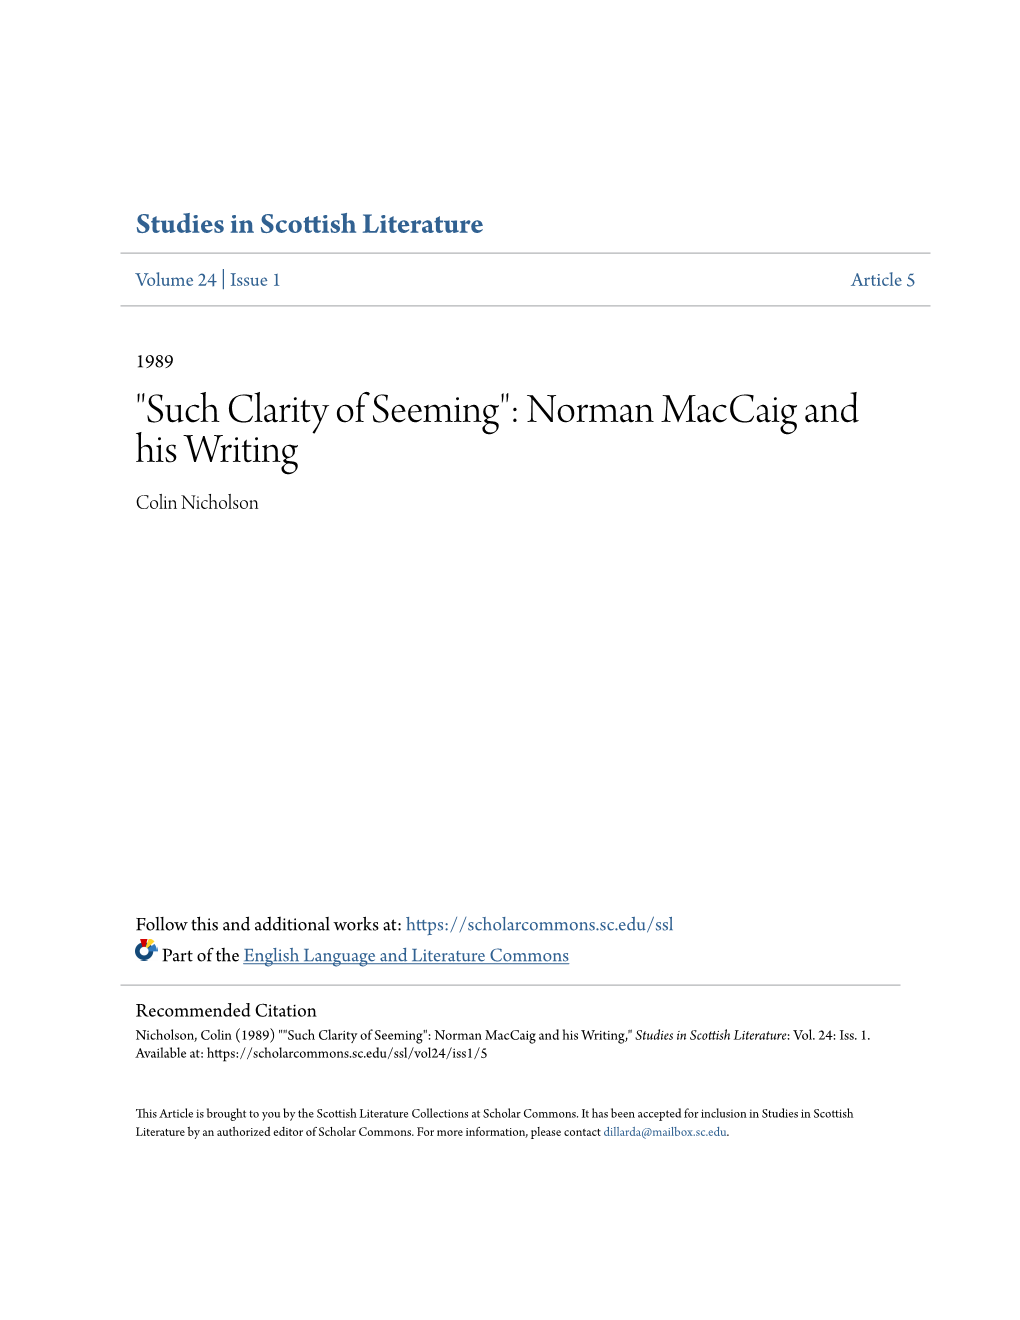 "Such Clarity of Seeming": Norman Maccaig and His Writing Colin Nicholson